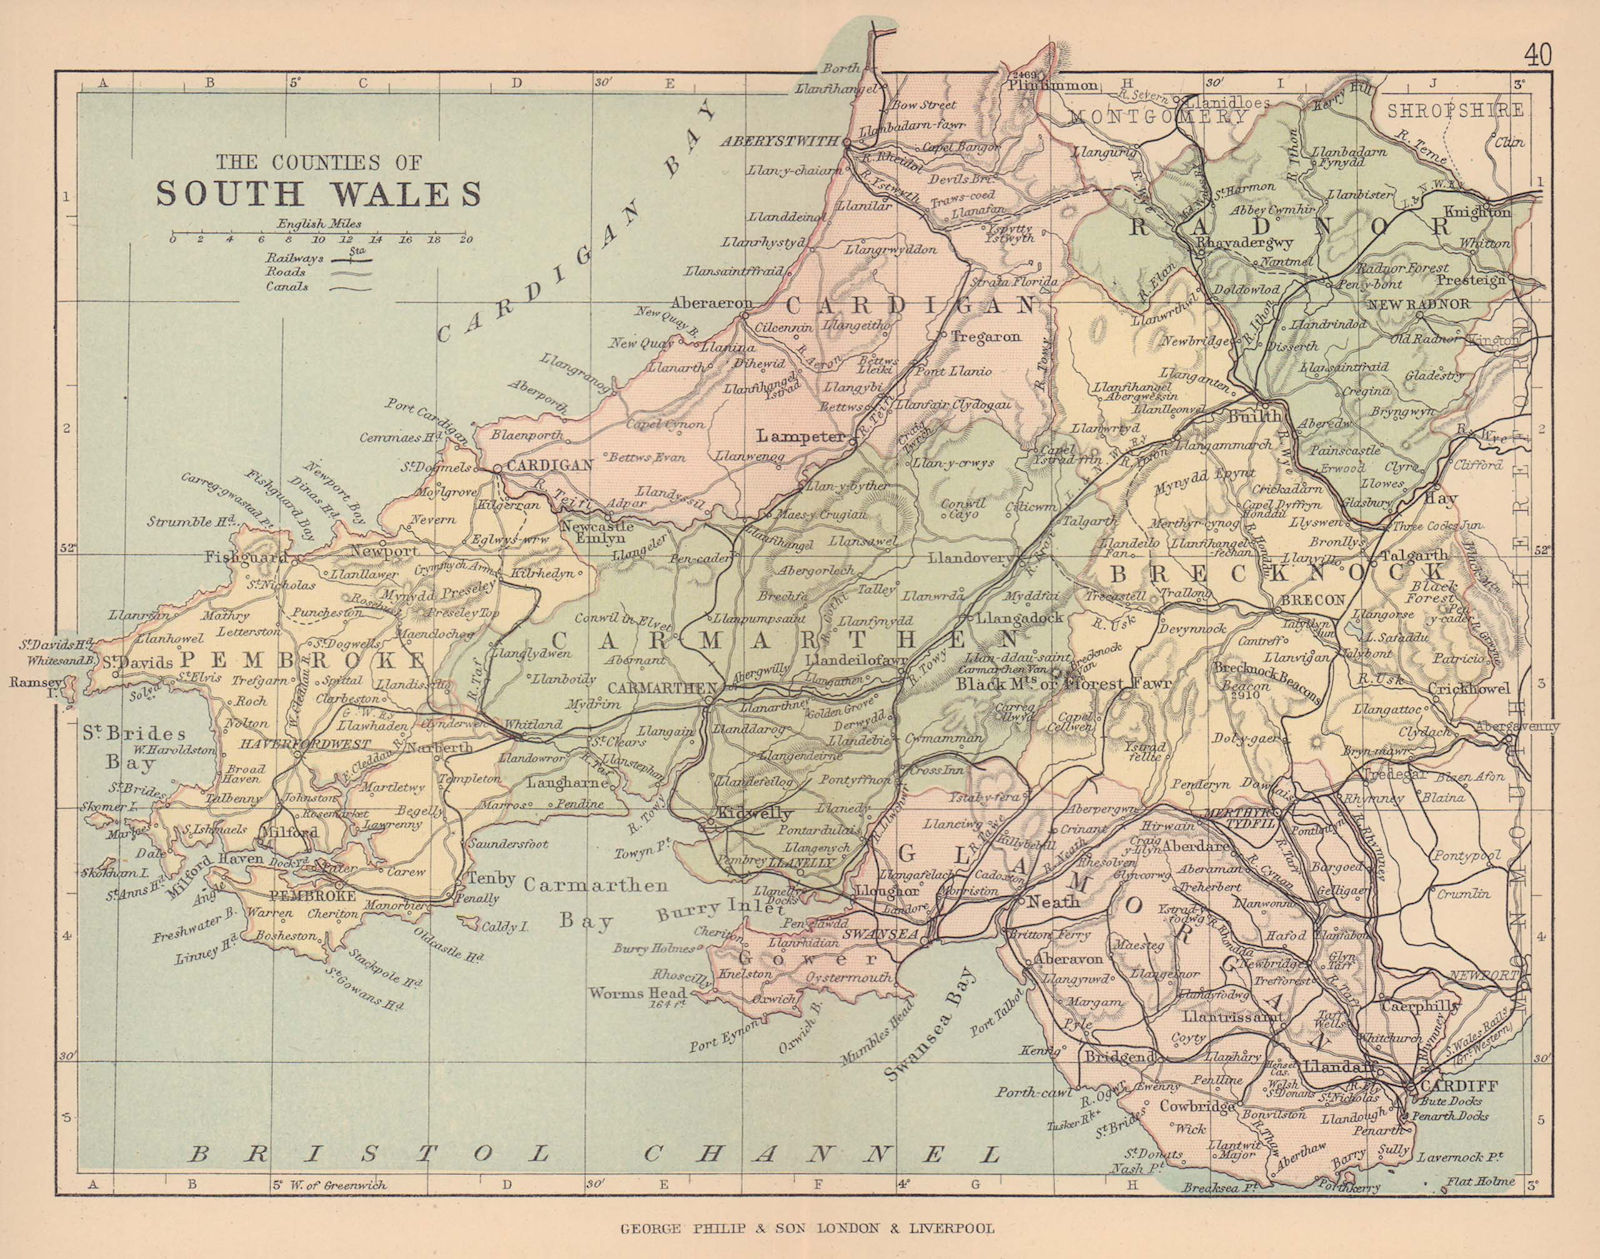 Associate Product SOUTH WALES. Antique map. Counties Railways roads canals. PHILIP 1885 old